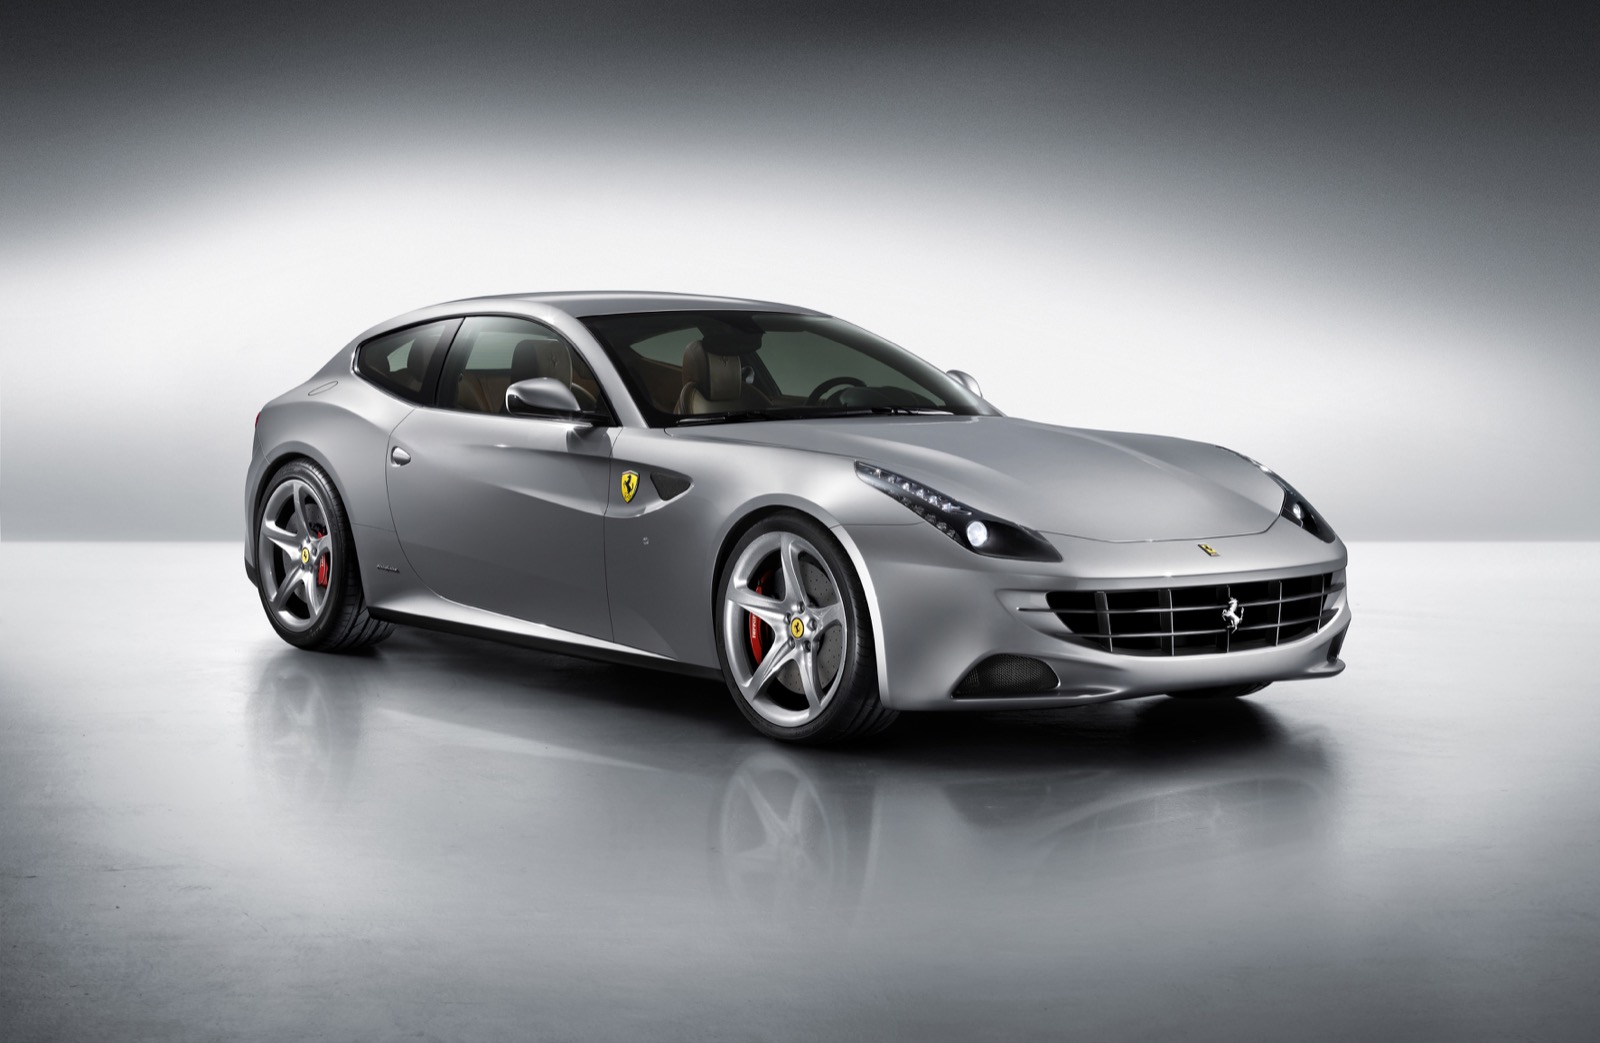 2015 Ferrari FF Summary Review - The Car Connection